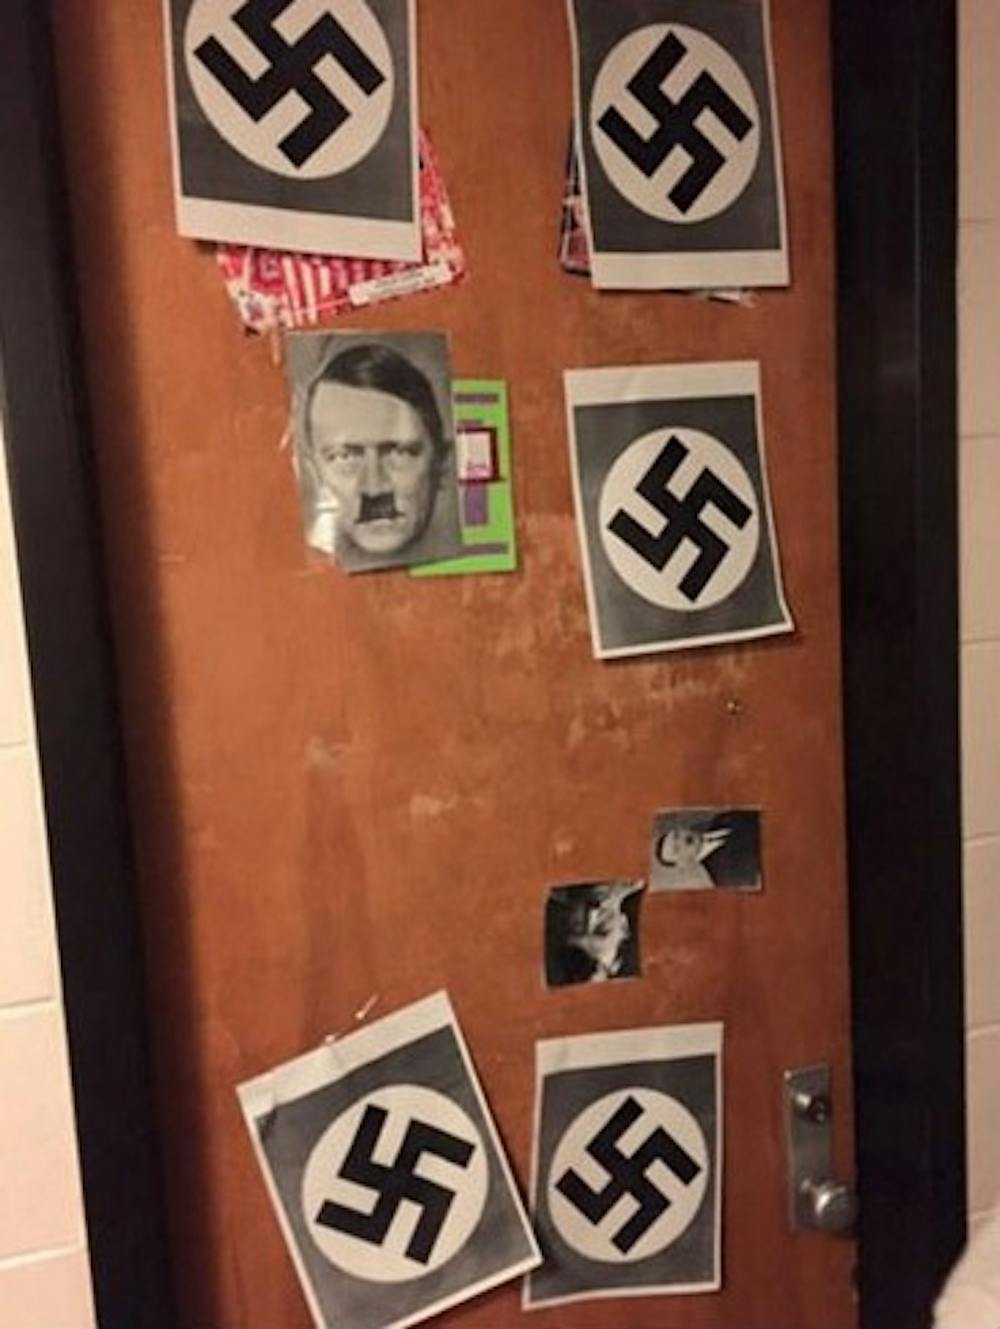 Students taped pictures of Hitler and swastikas to another resident’s door Jan. 26.